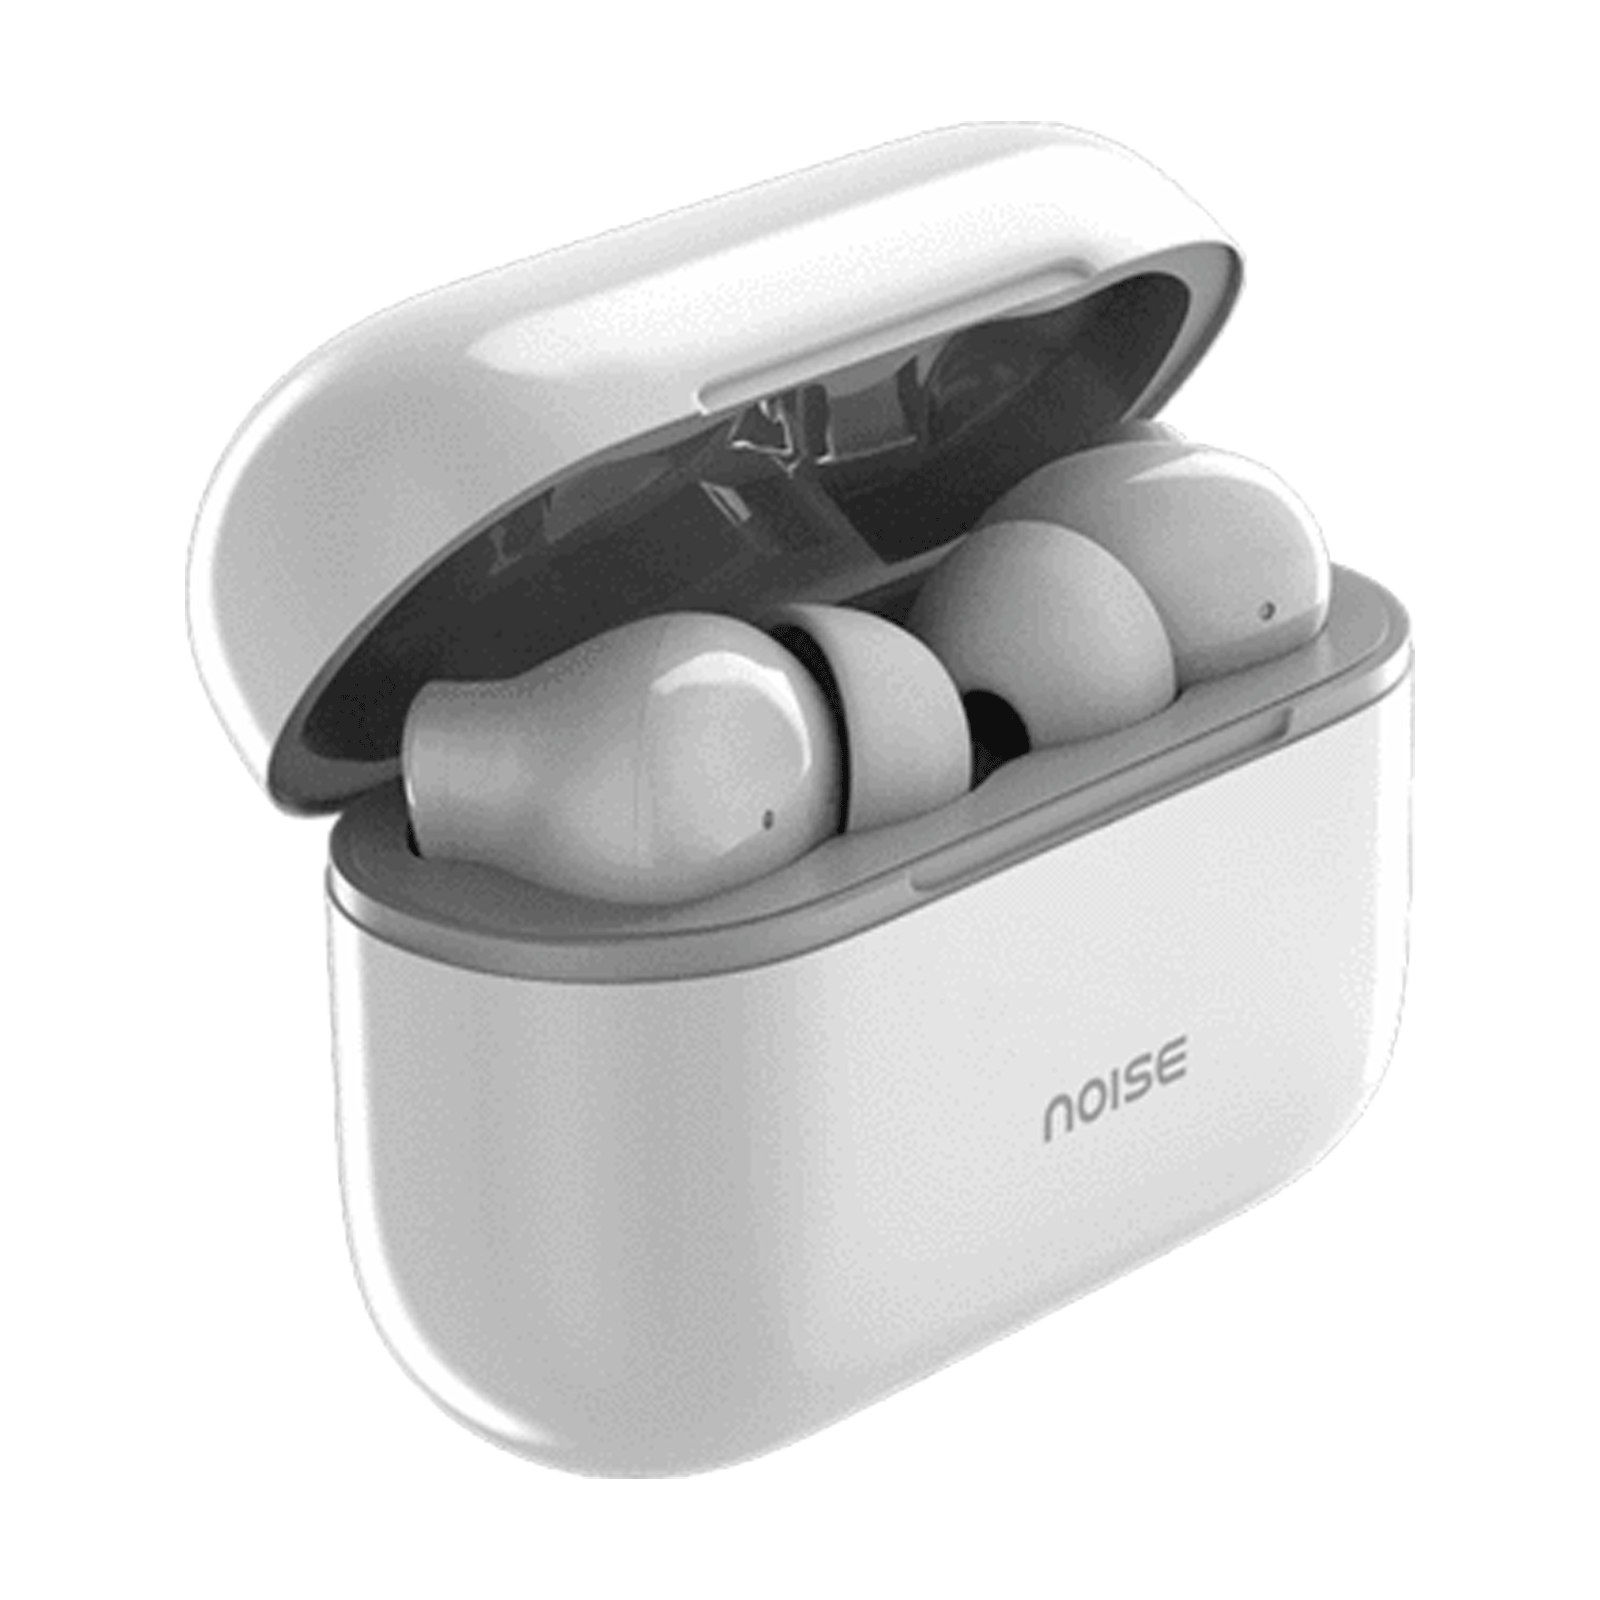 Noise Buds AUD-HDPHN-BUDSVS10 In-Ear Truly Wireless Earbuds with Mic (Bluetooth 5.1, Unique Flybird Design, White)_1